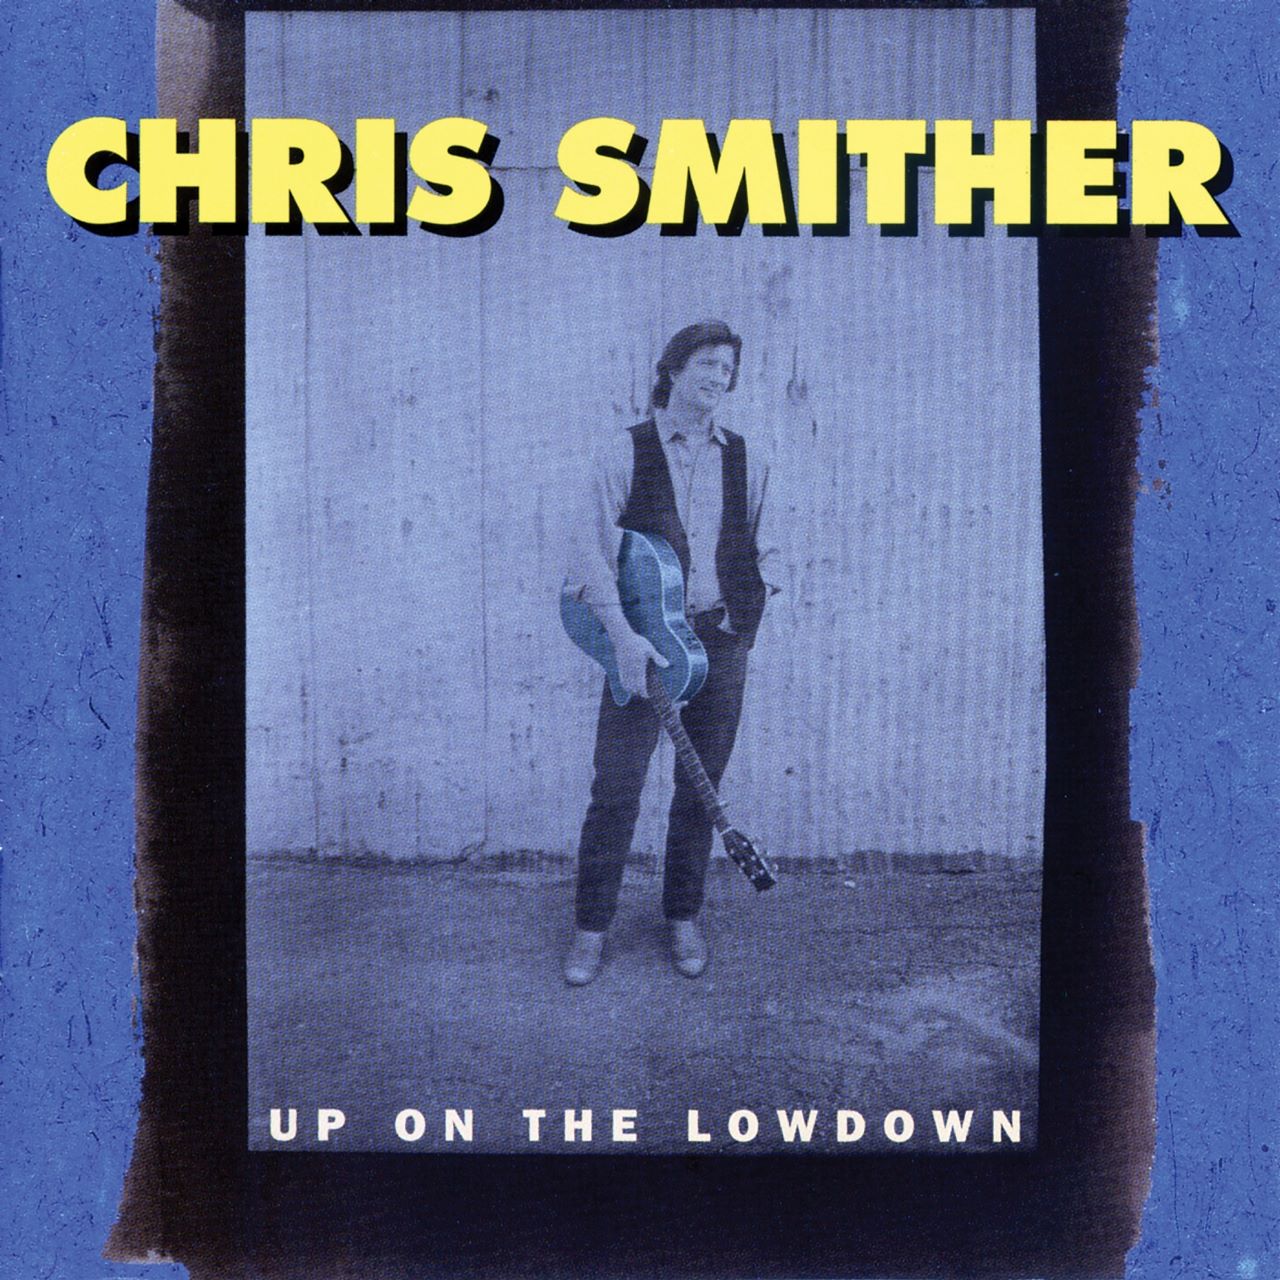 Chris Smither - Up On The Lowdown cover album